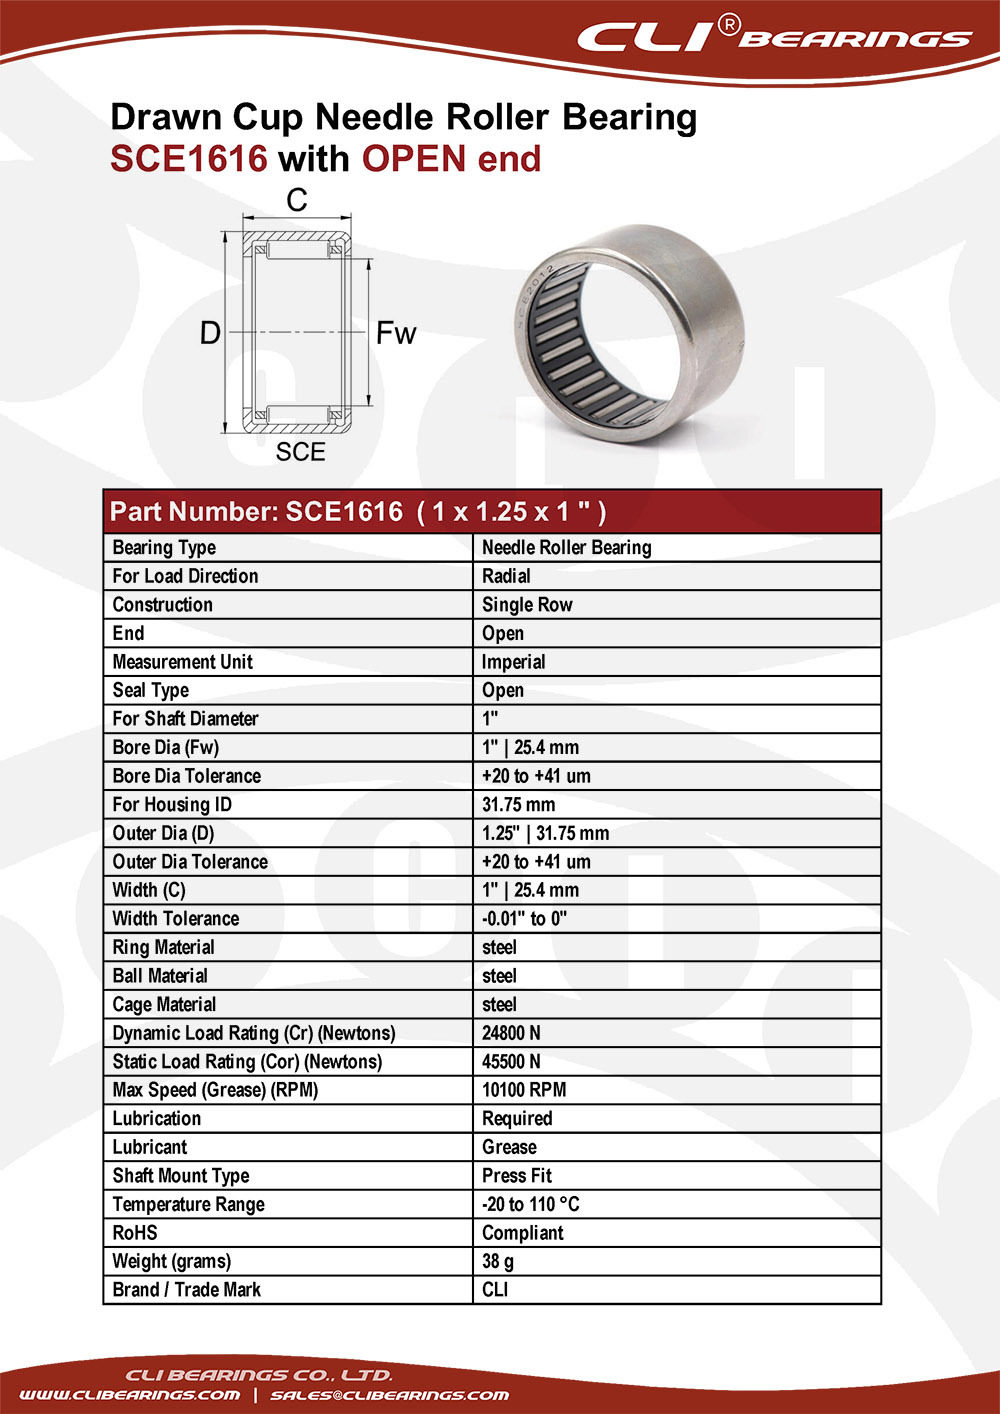 Original sce1616 1x1 25x1 drawn cup needle roller bearings with open ends   cli bearings co ltd nw